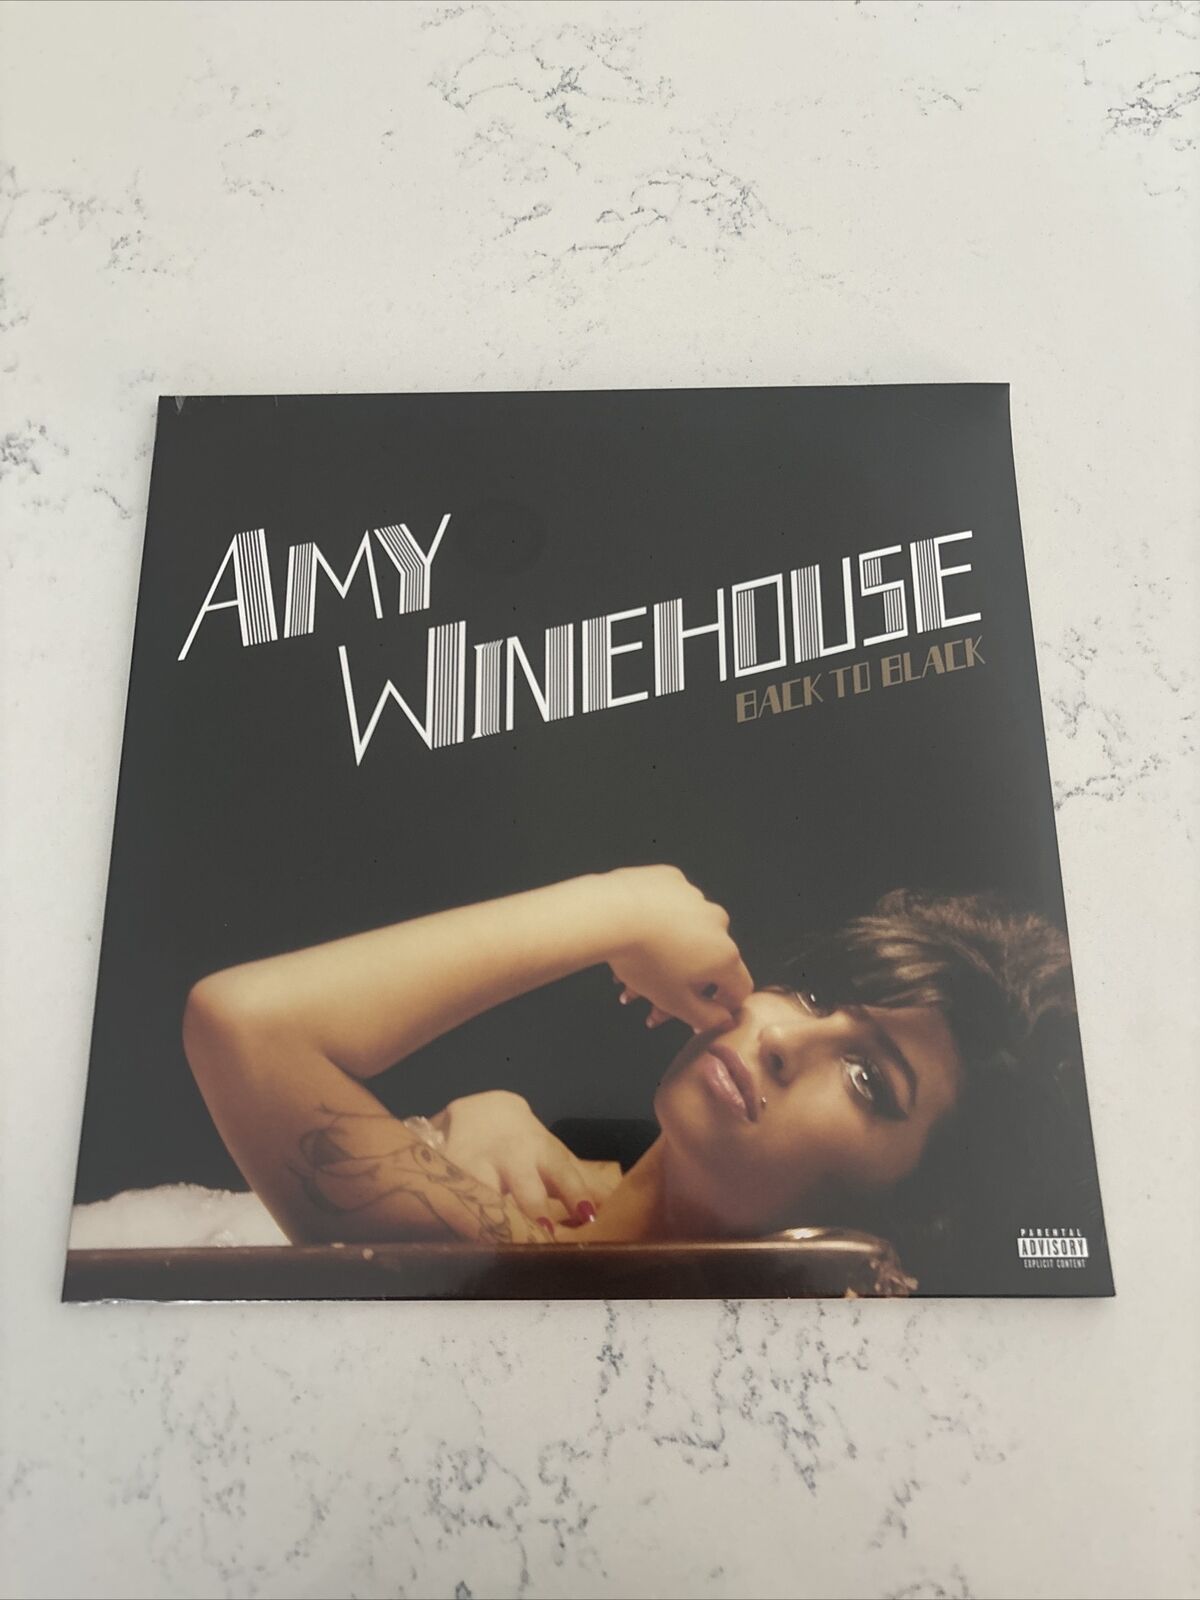 RARE “Amy Winehouse - Back to Black” [New Vinyl Exclusive Record LP] Explicit